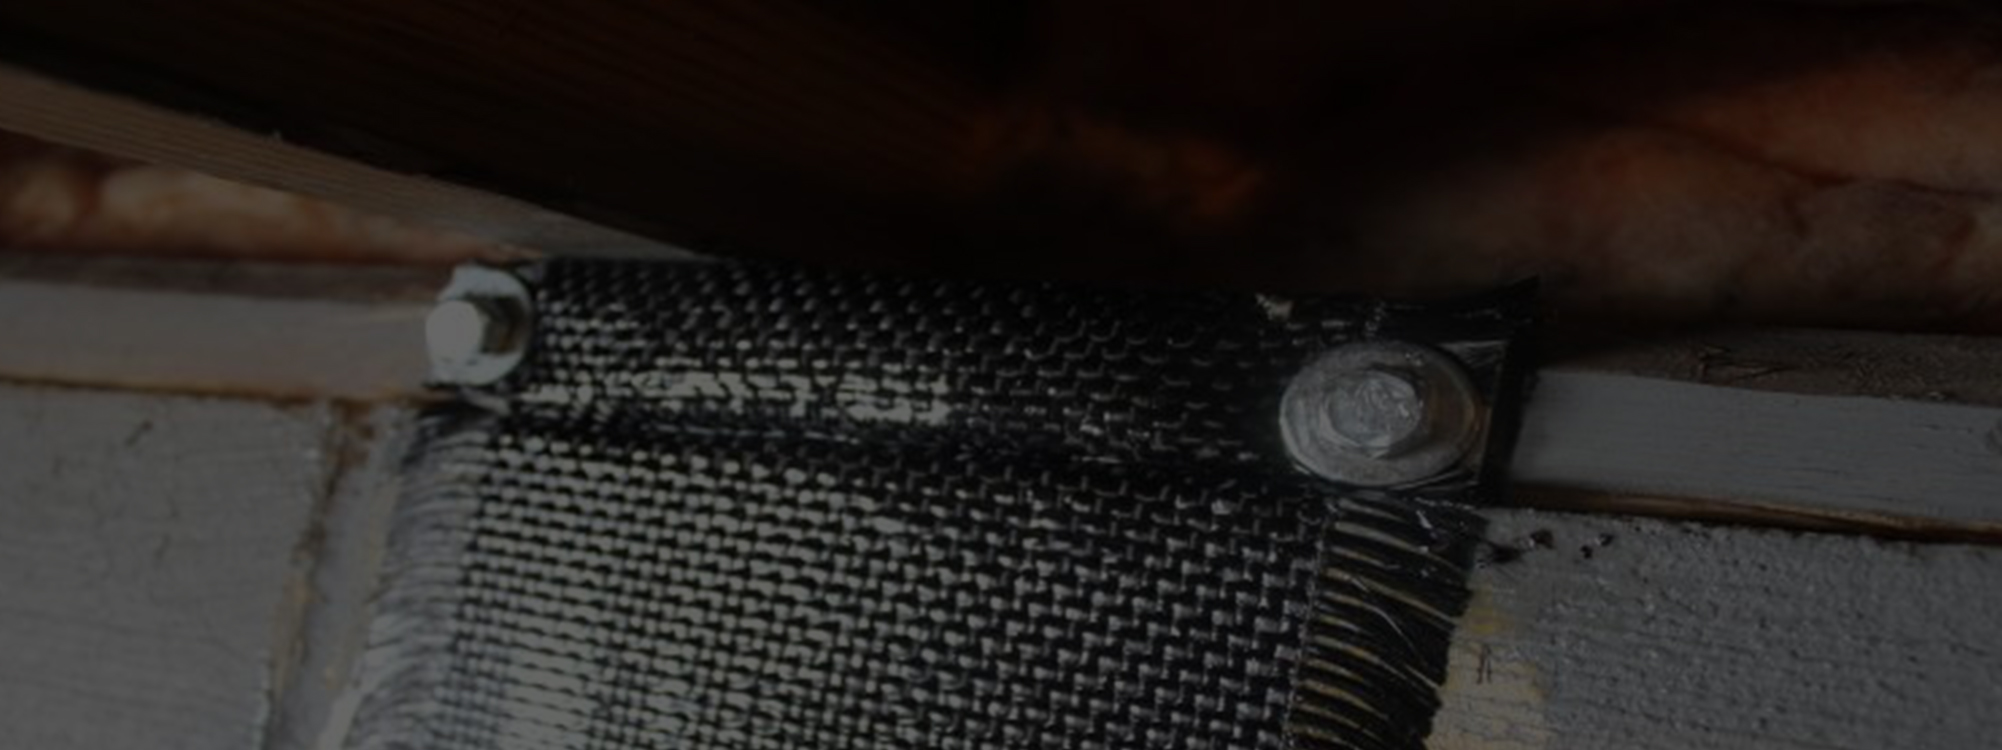 Image showing Rhino Carbon Fiber's products in use.